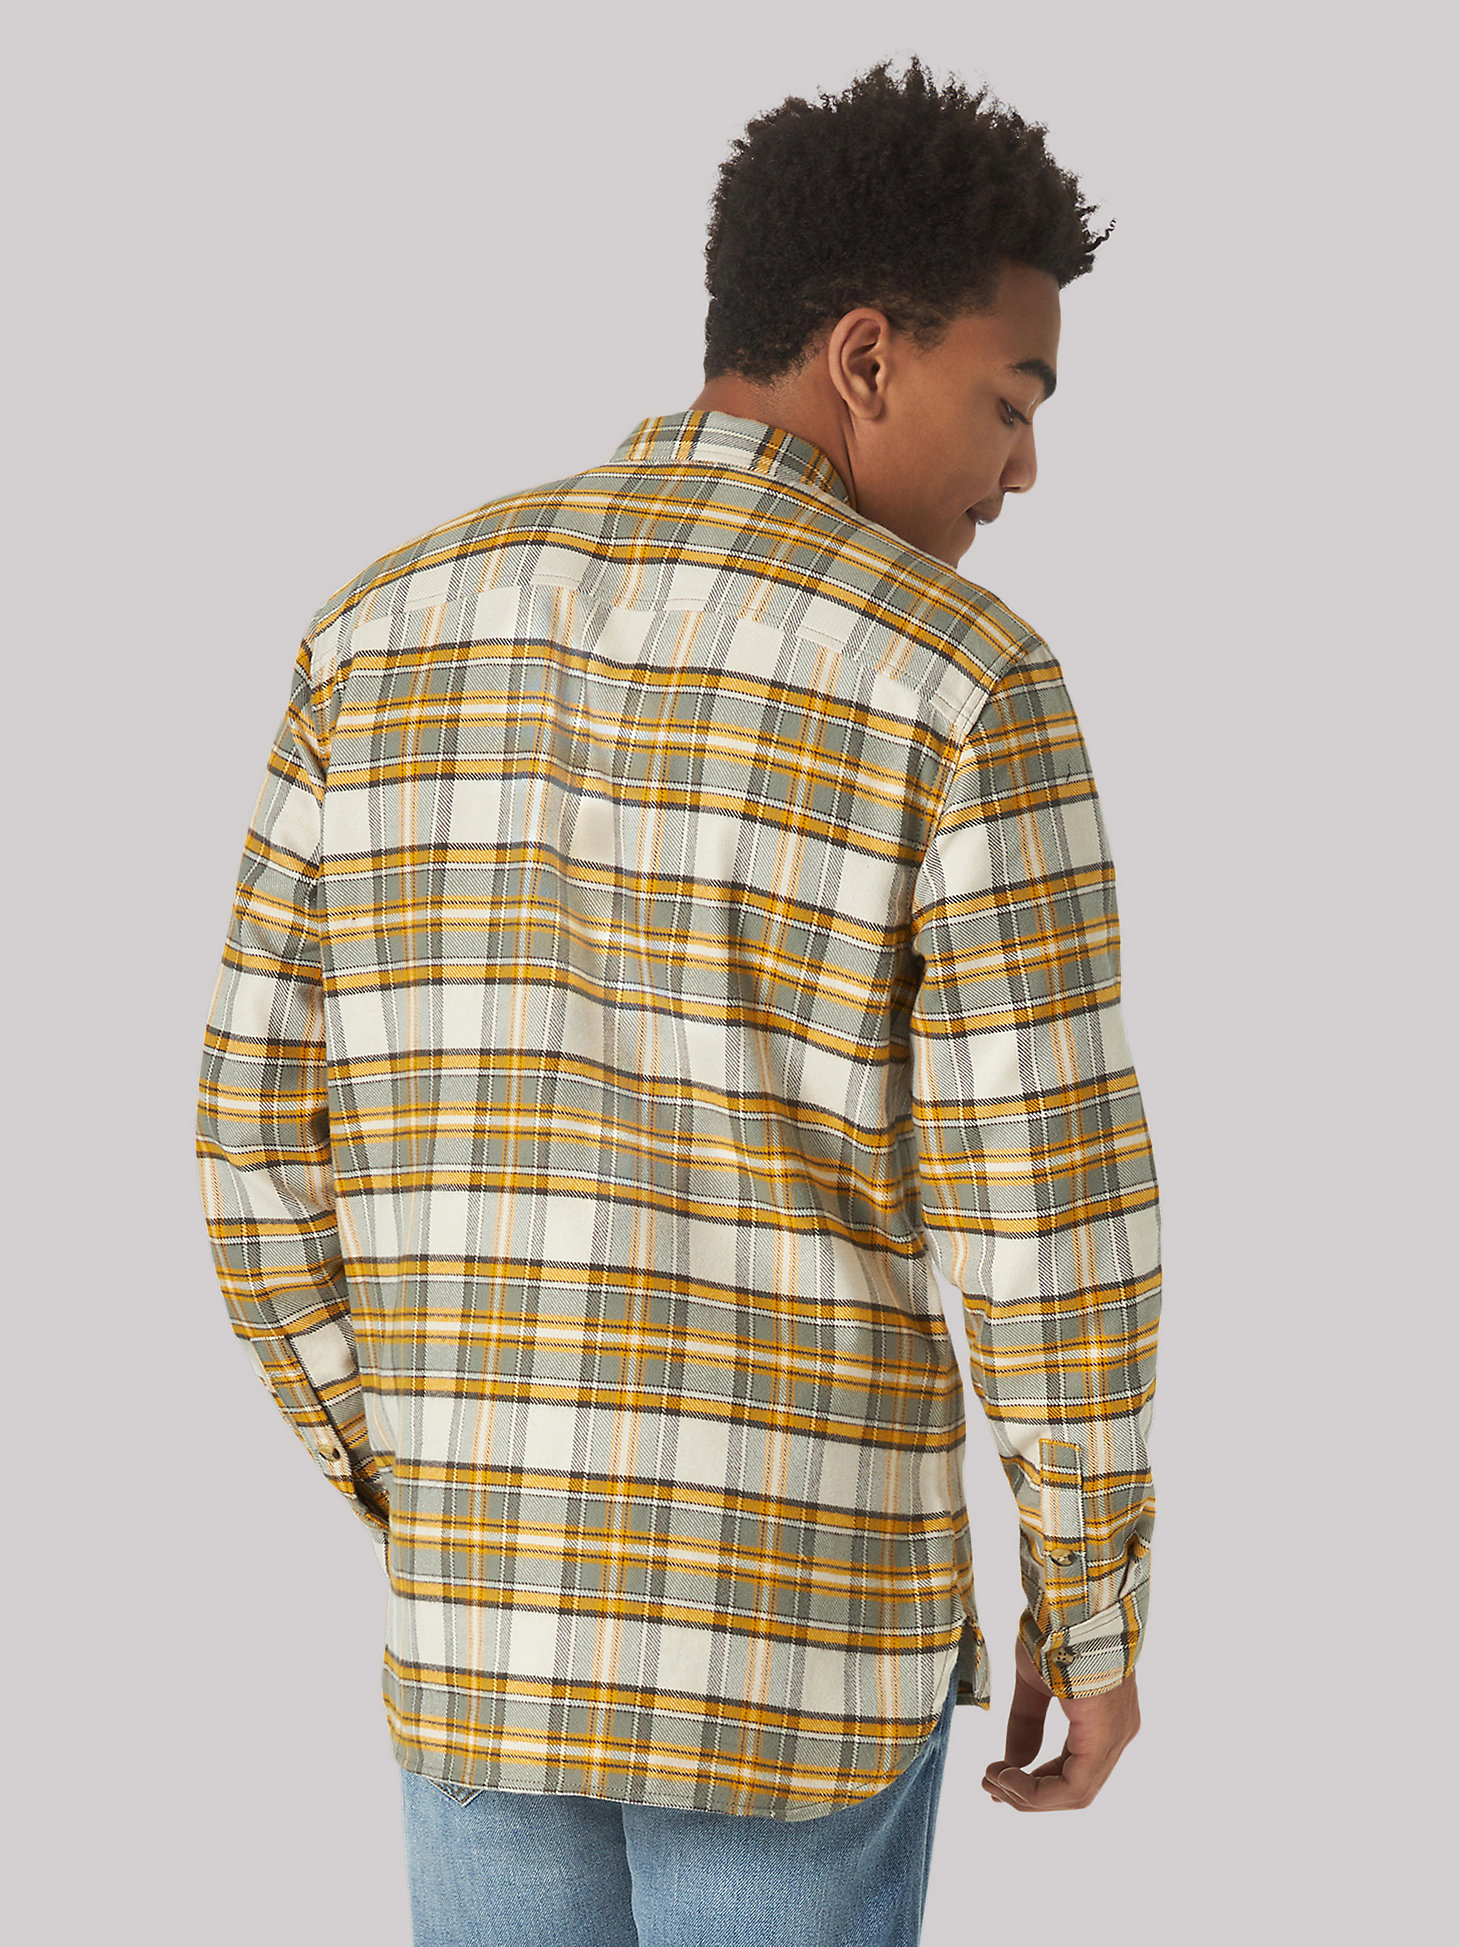 Men's Heritage Flannel Plaid Button Down Shirt in Yellow Grey Flannel alternative view 1